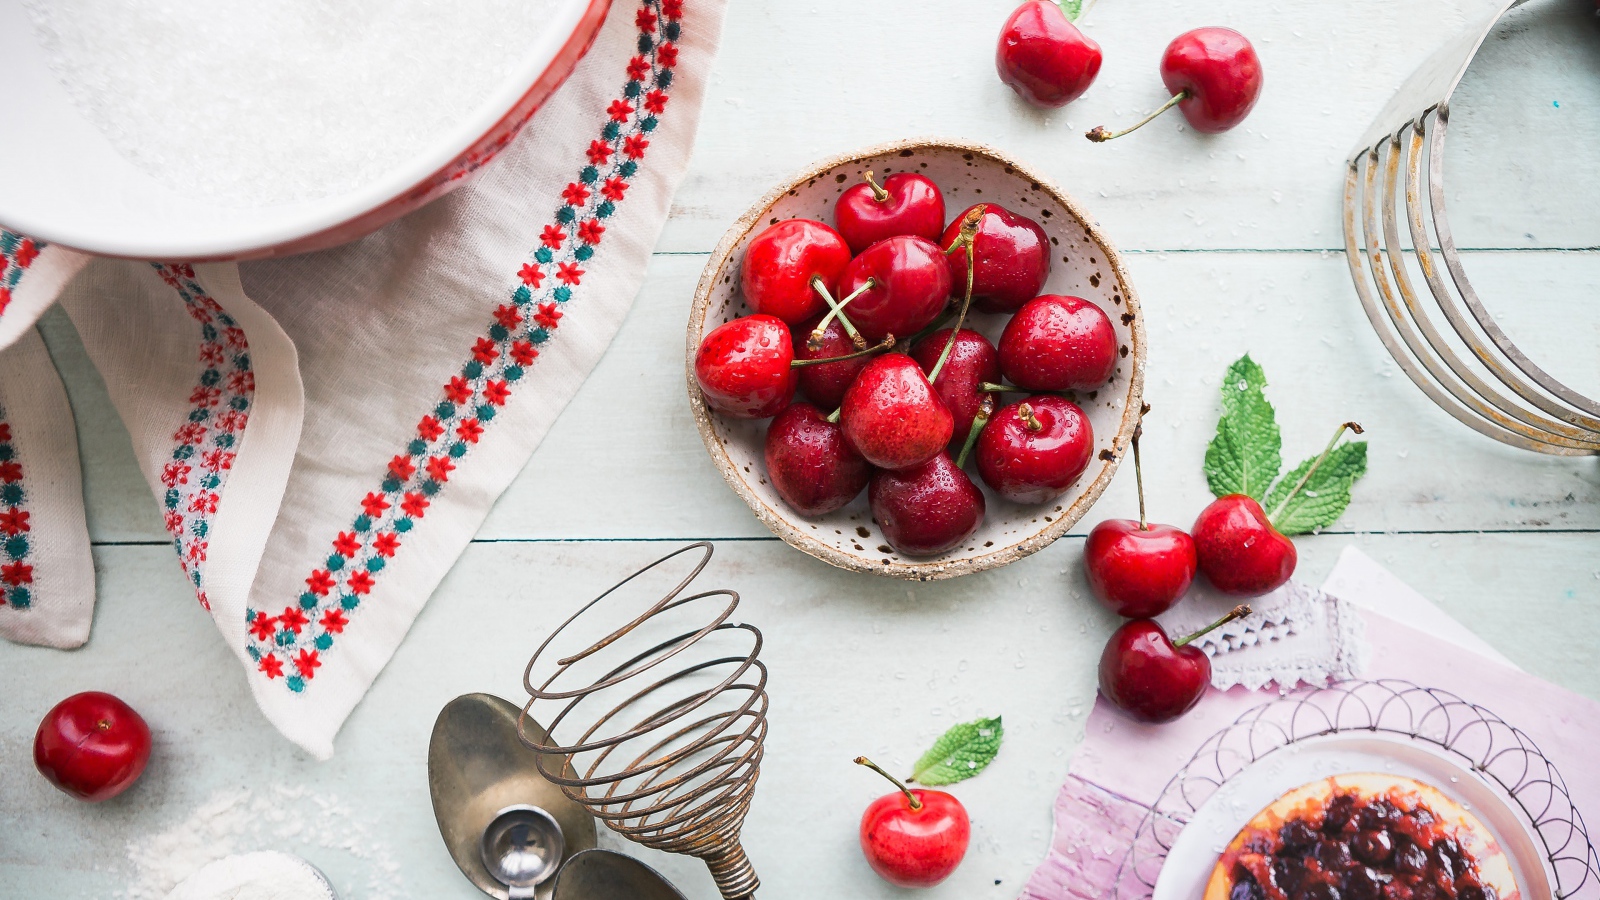 Wet cherries on a table with a cake